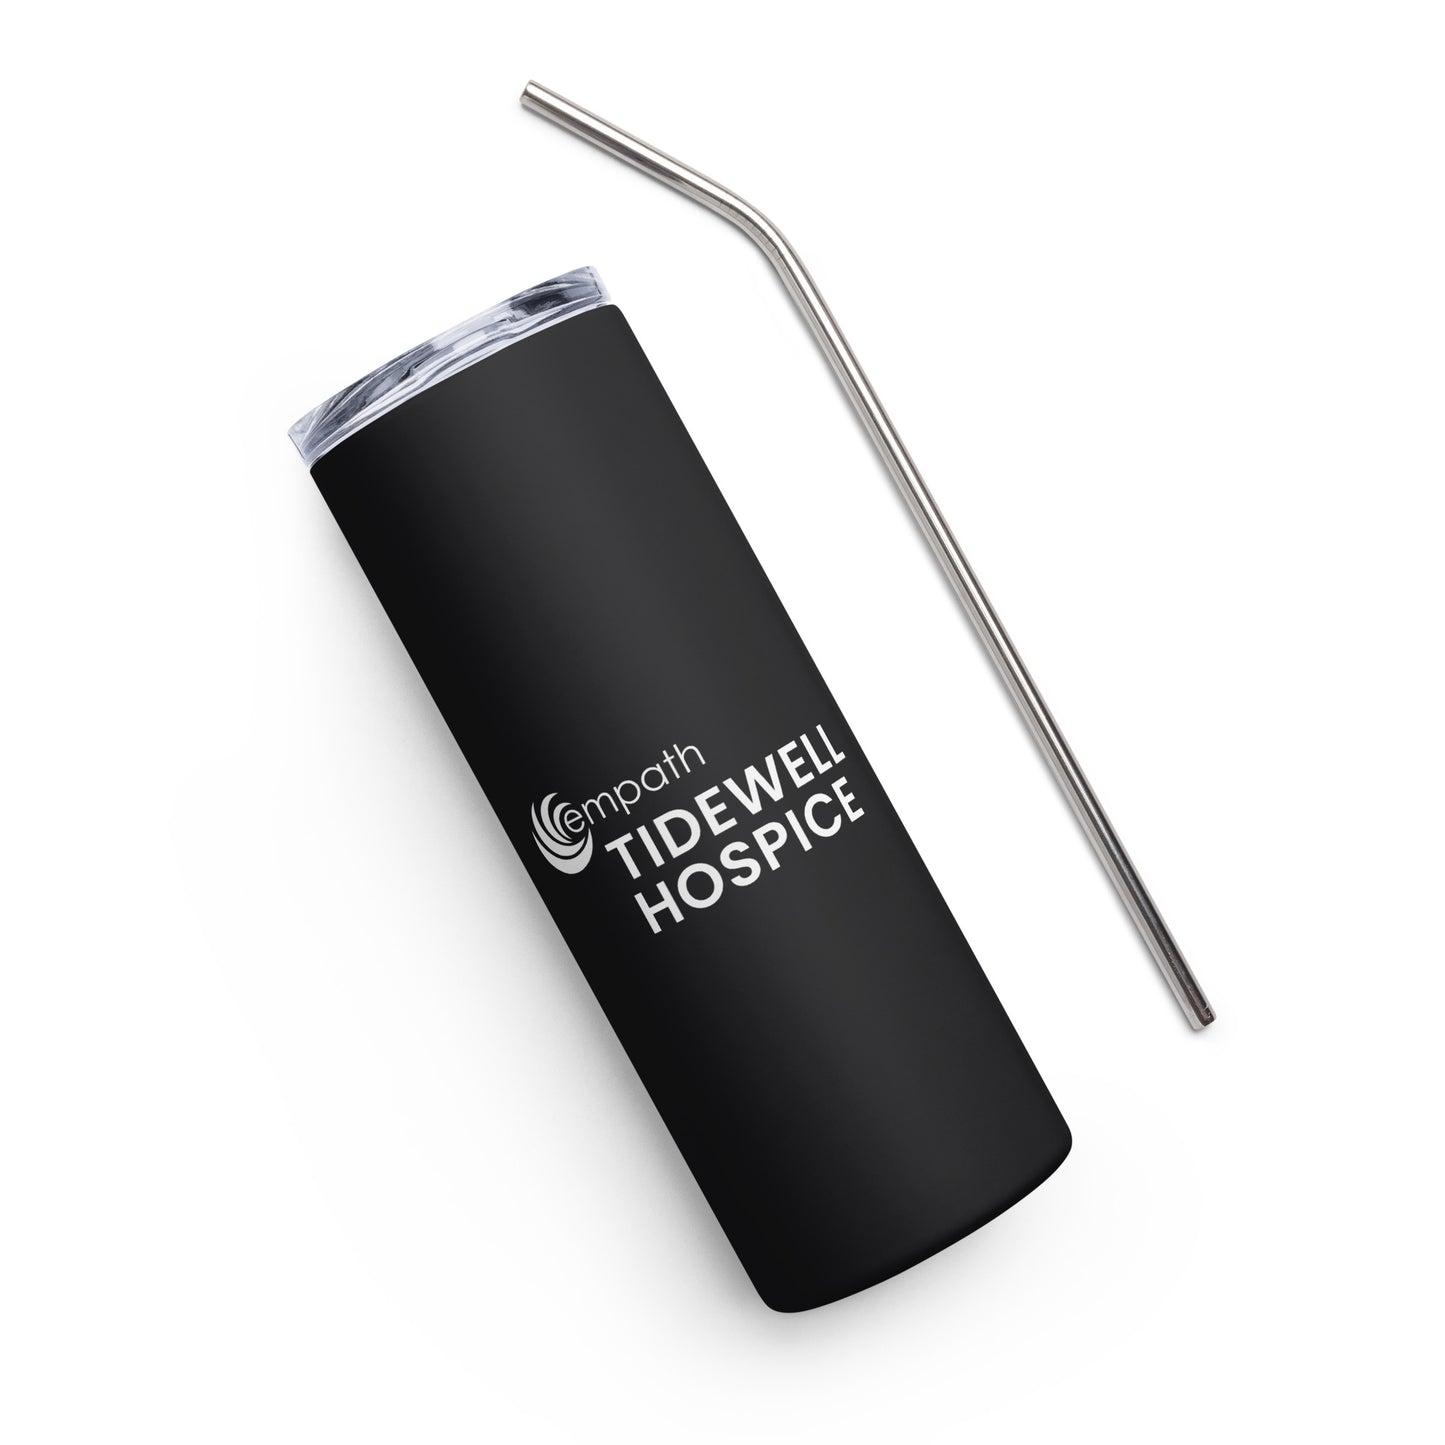 Stainless steel tumbler - Tidewell Hospice